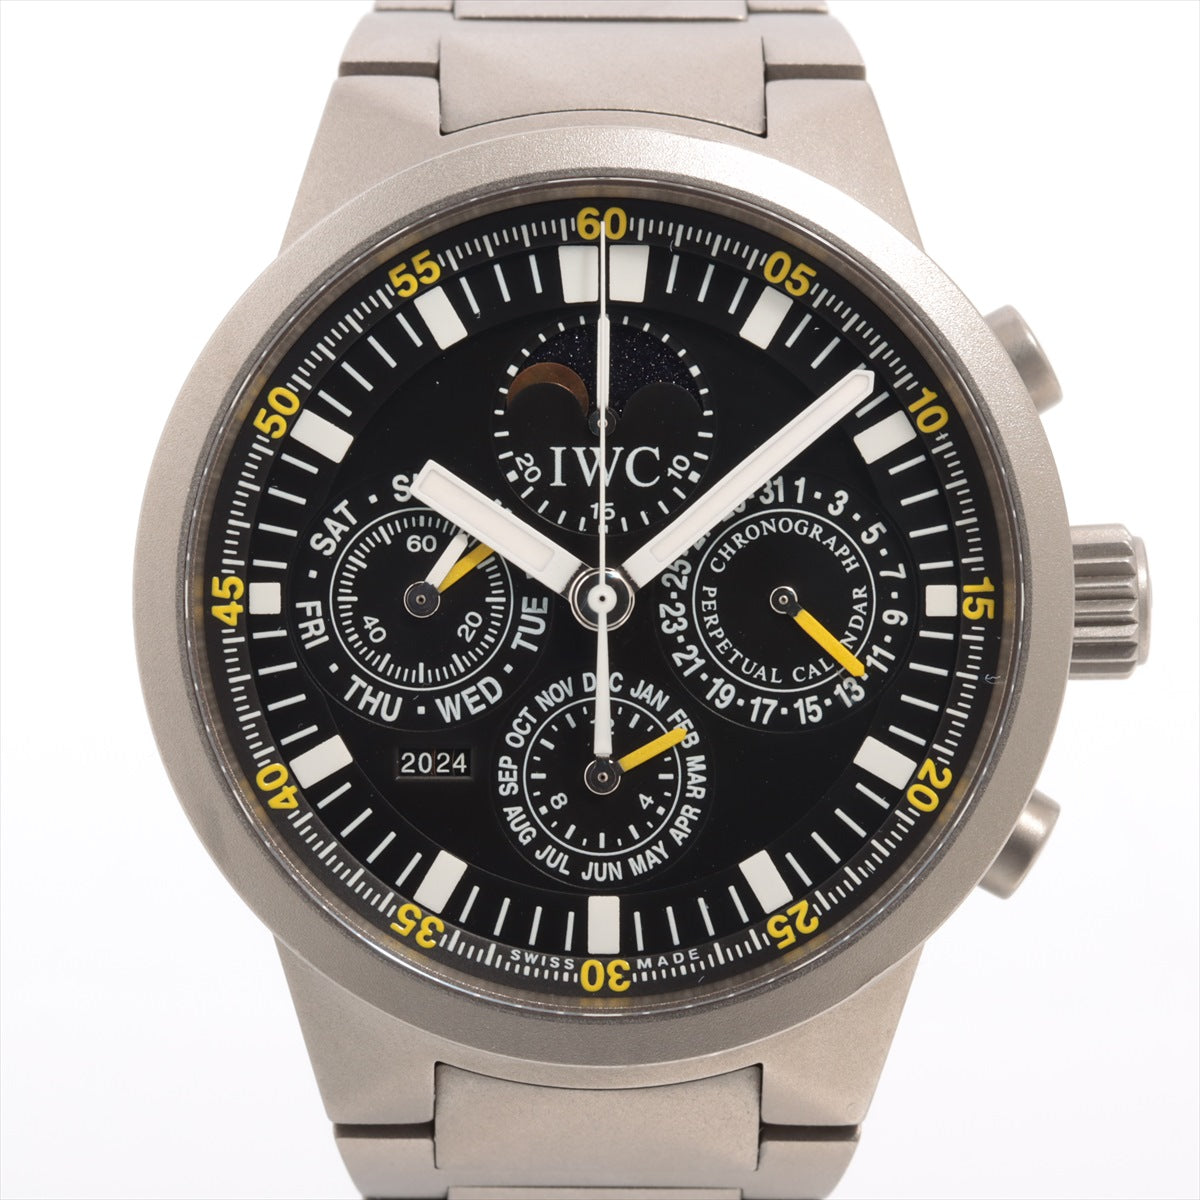 IWC GST PERPETUAL CALENDAR Chronograph IW375603 TI AT Black Dial 4 Extra Links